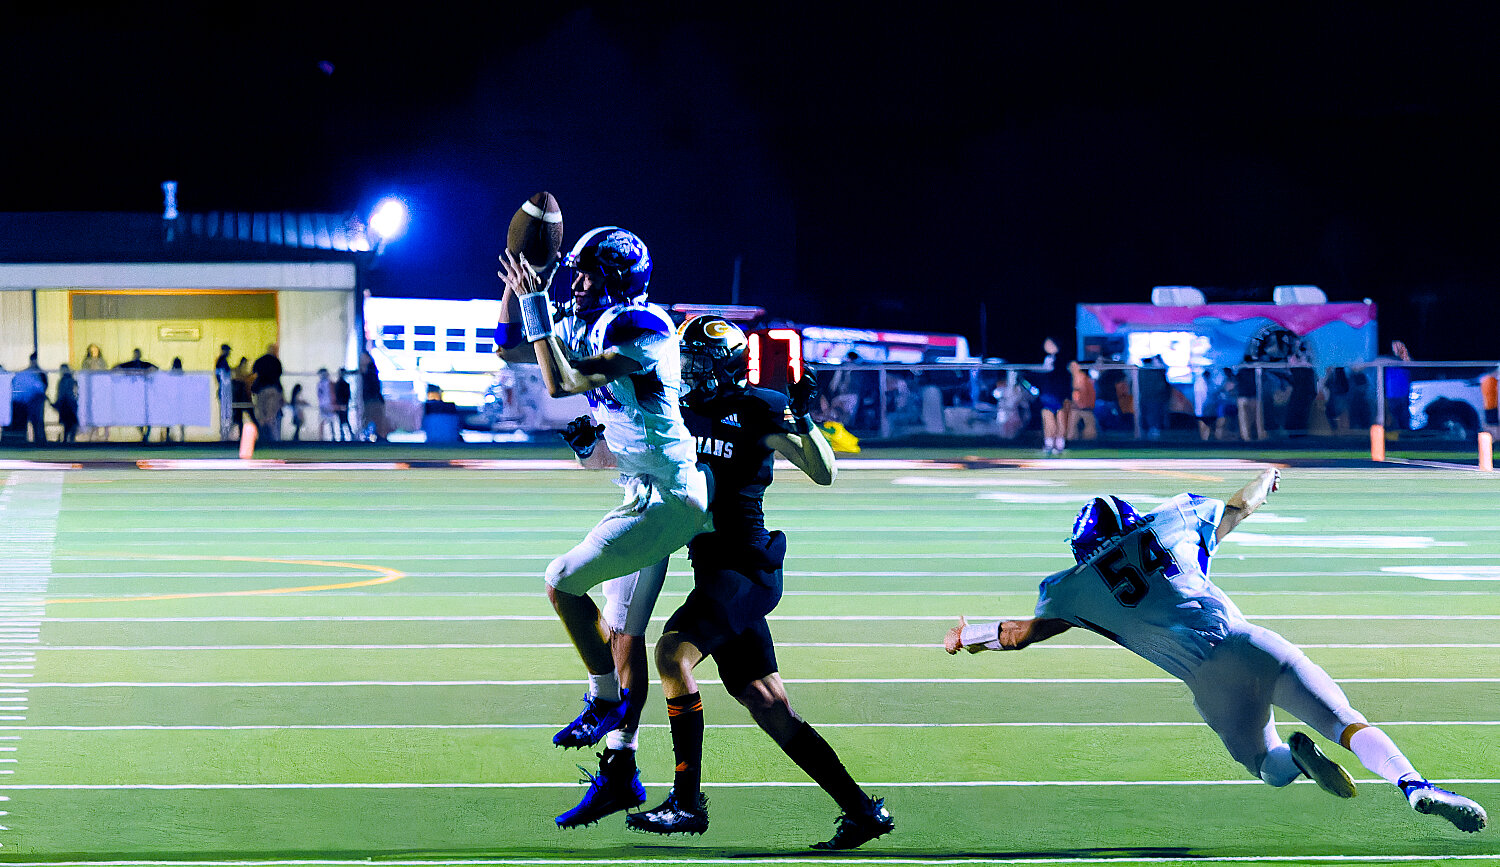 Bryan Hobbs nabs a pass over the middle, scoring the Bulldogs' only points of the night. [few more photos here]